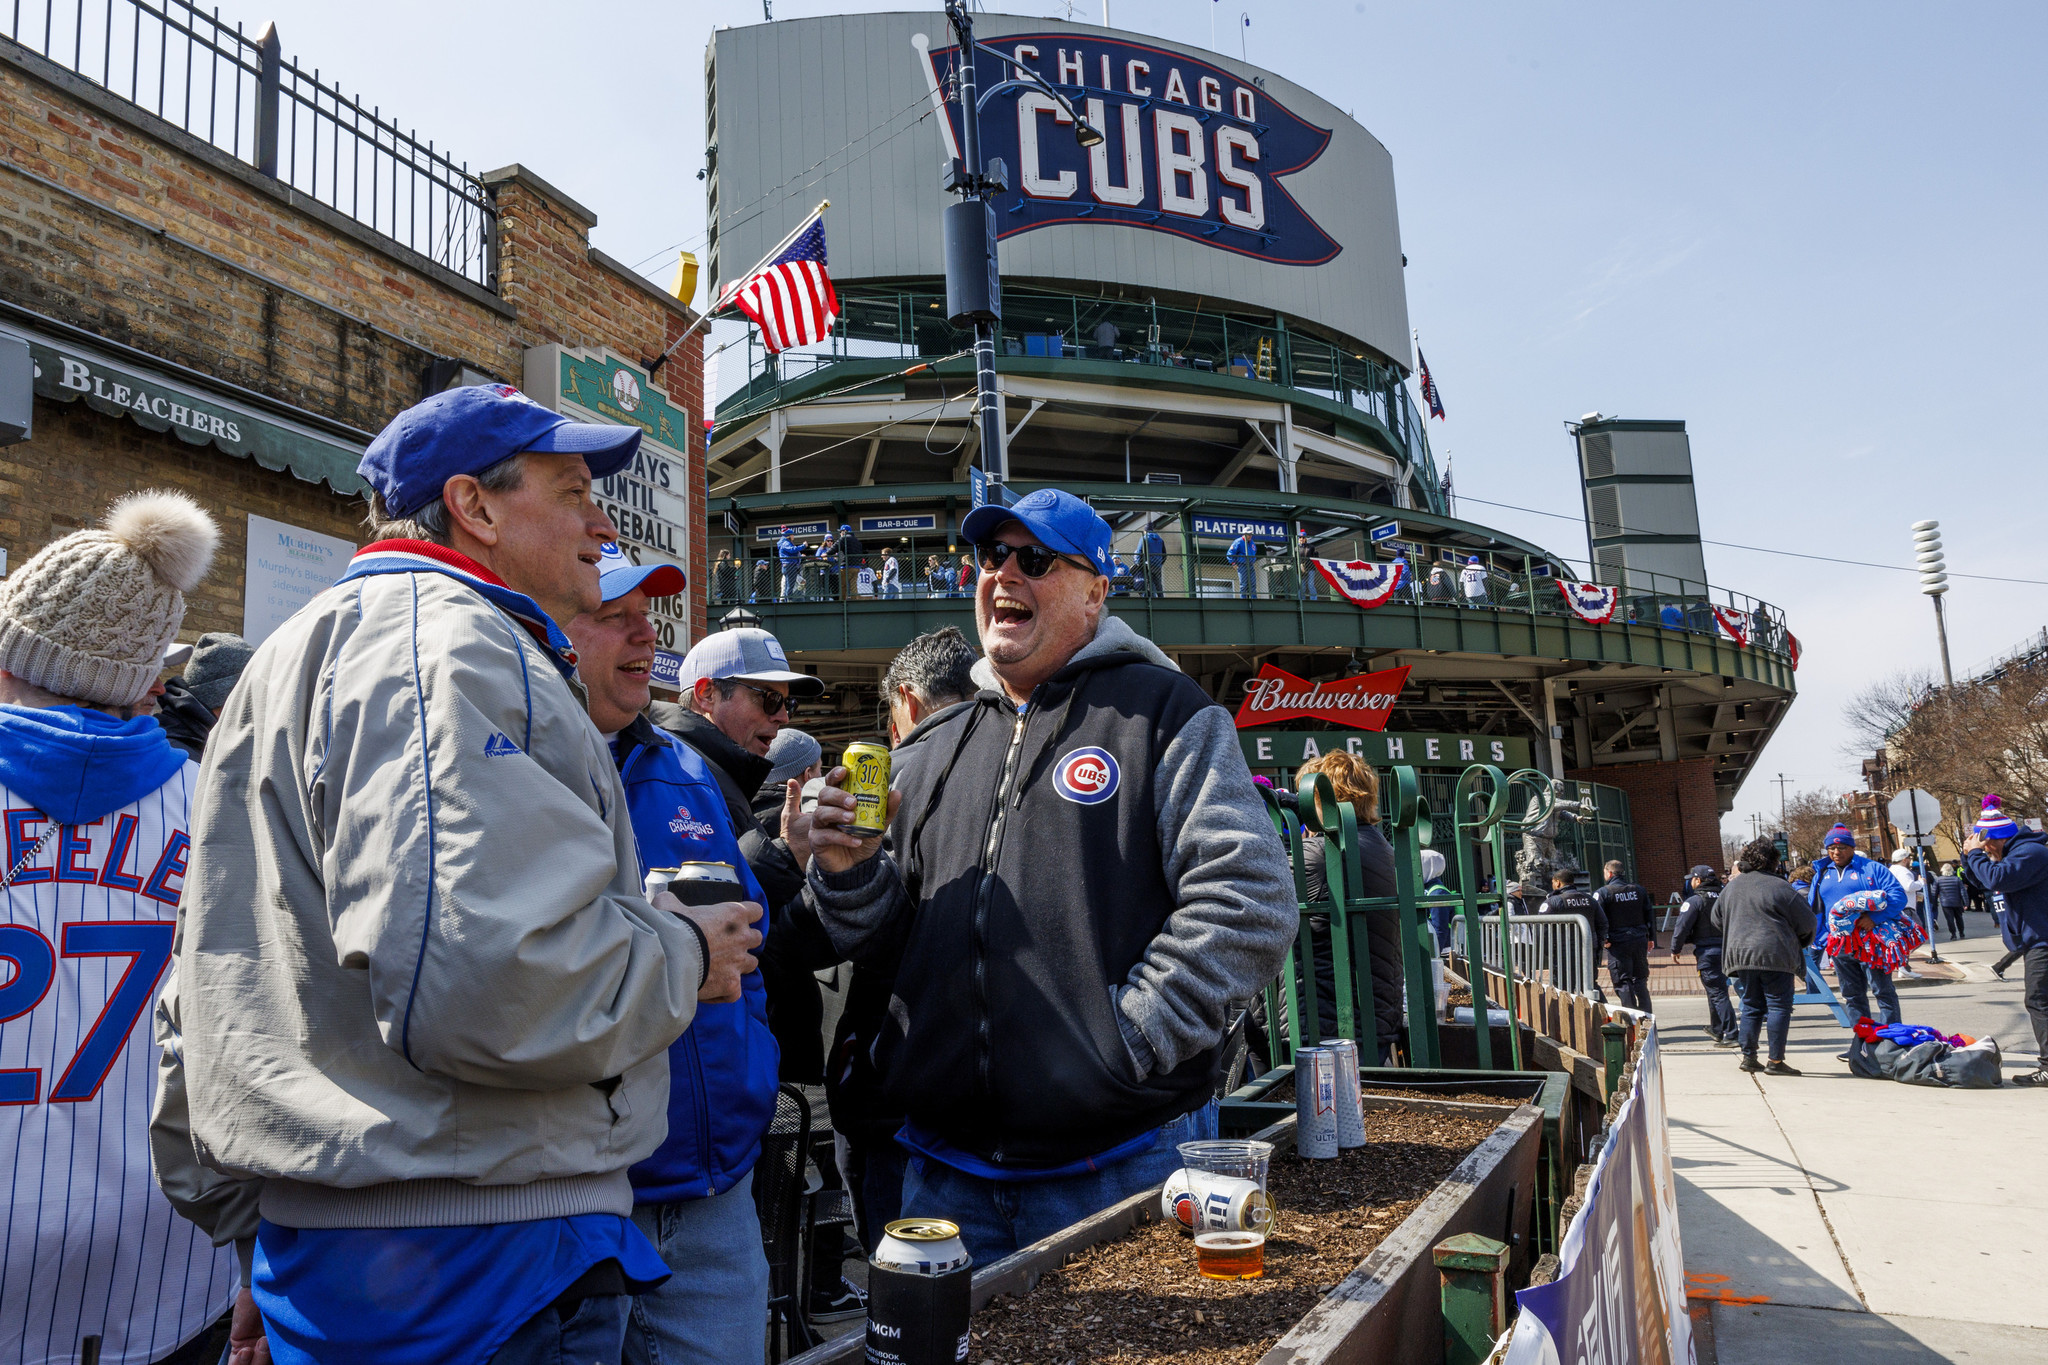 Cubs Watch Party FAQs